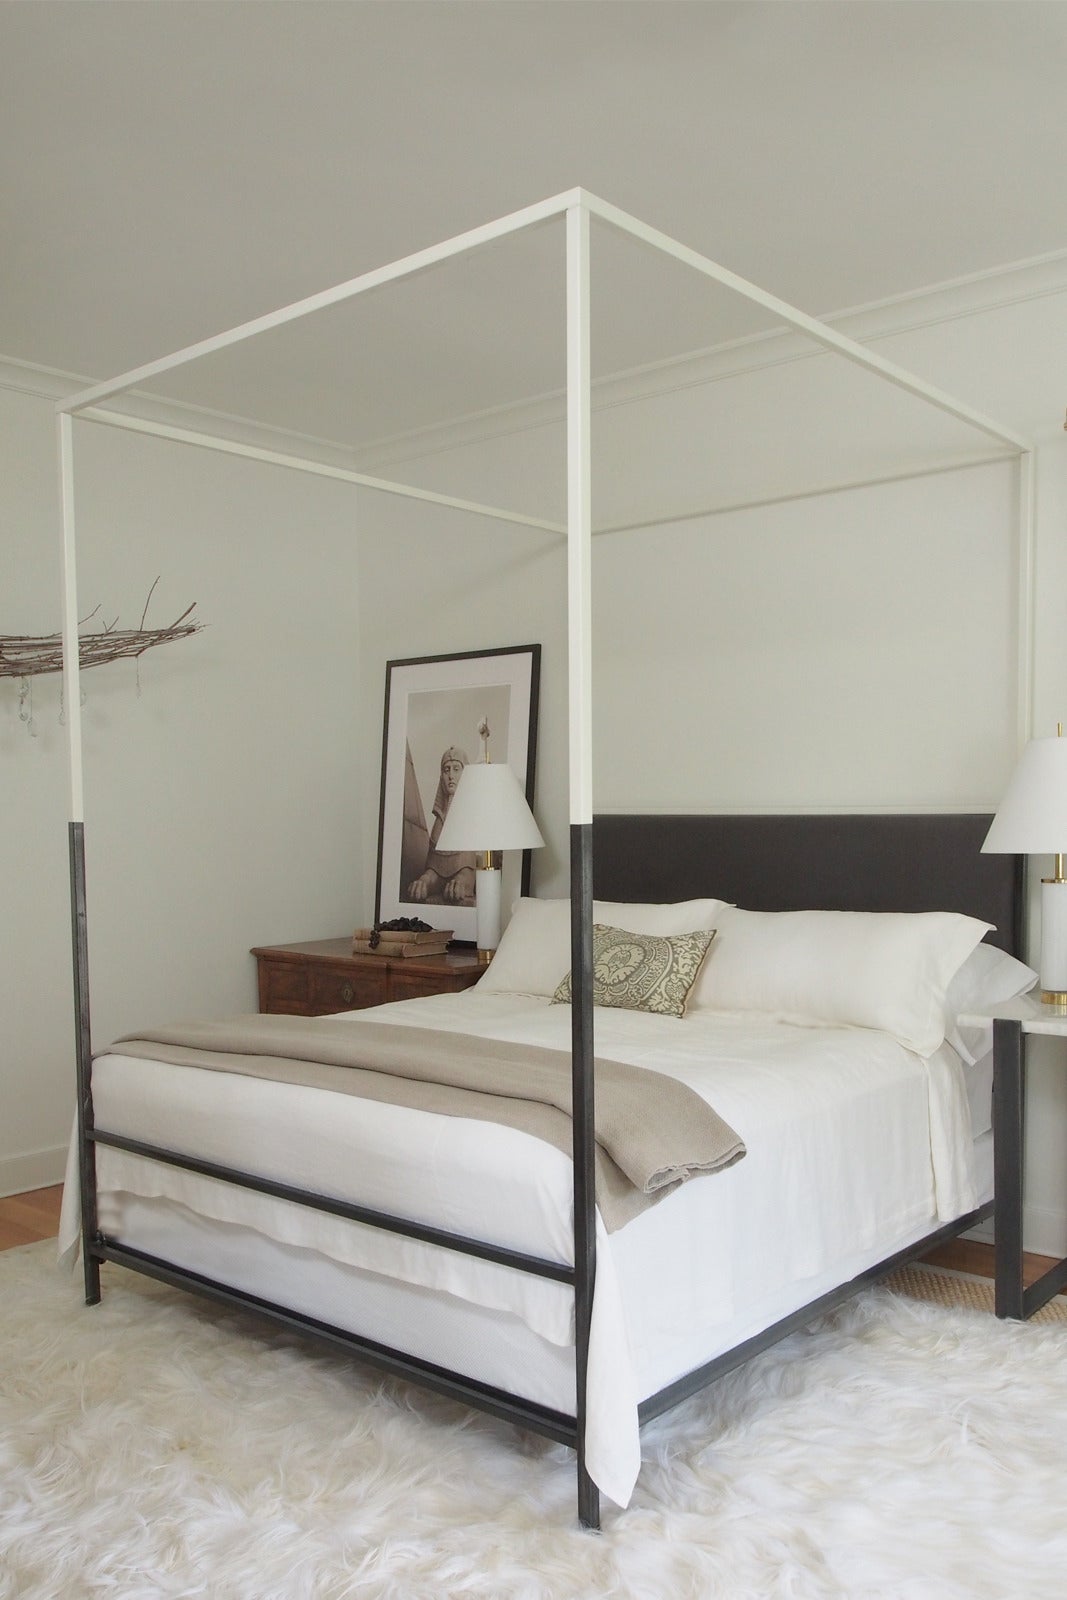 Twin Size. This ultra-sleek and streamlined two-tone canopy bed with upholstered headboard from the custom Tara Shaw Maison collection has been featured in several shelter magazines, including Veranda and Architectural Digest. Handcrafted in New